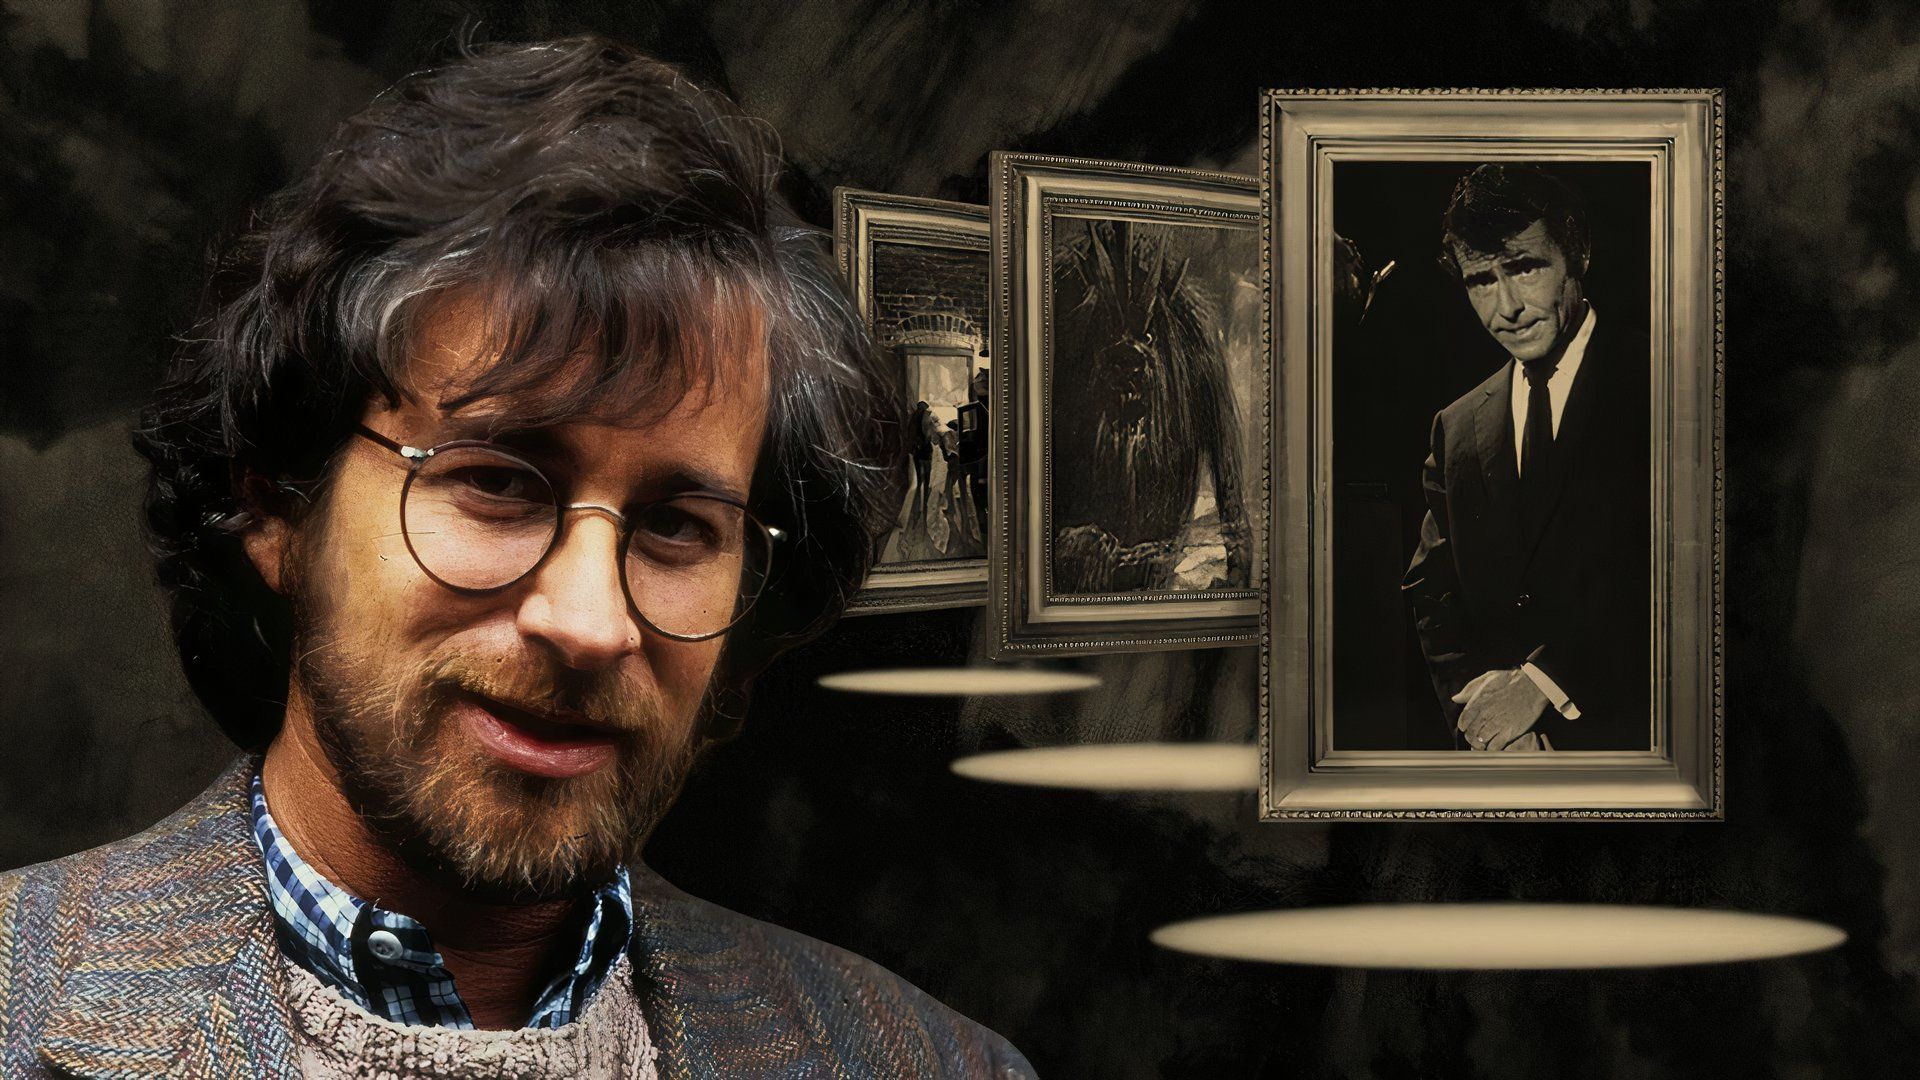 A custom image of Steven Spielberg and Night Gallery